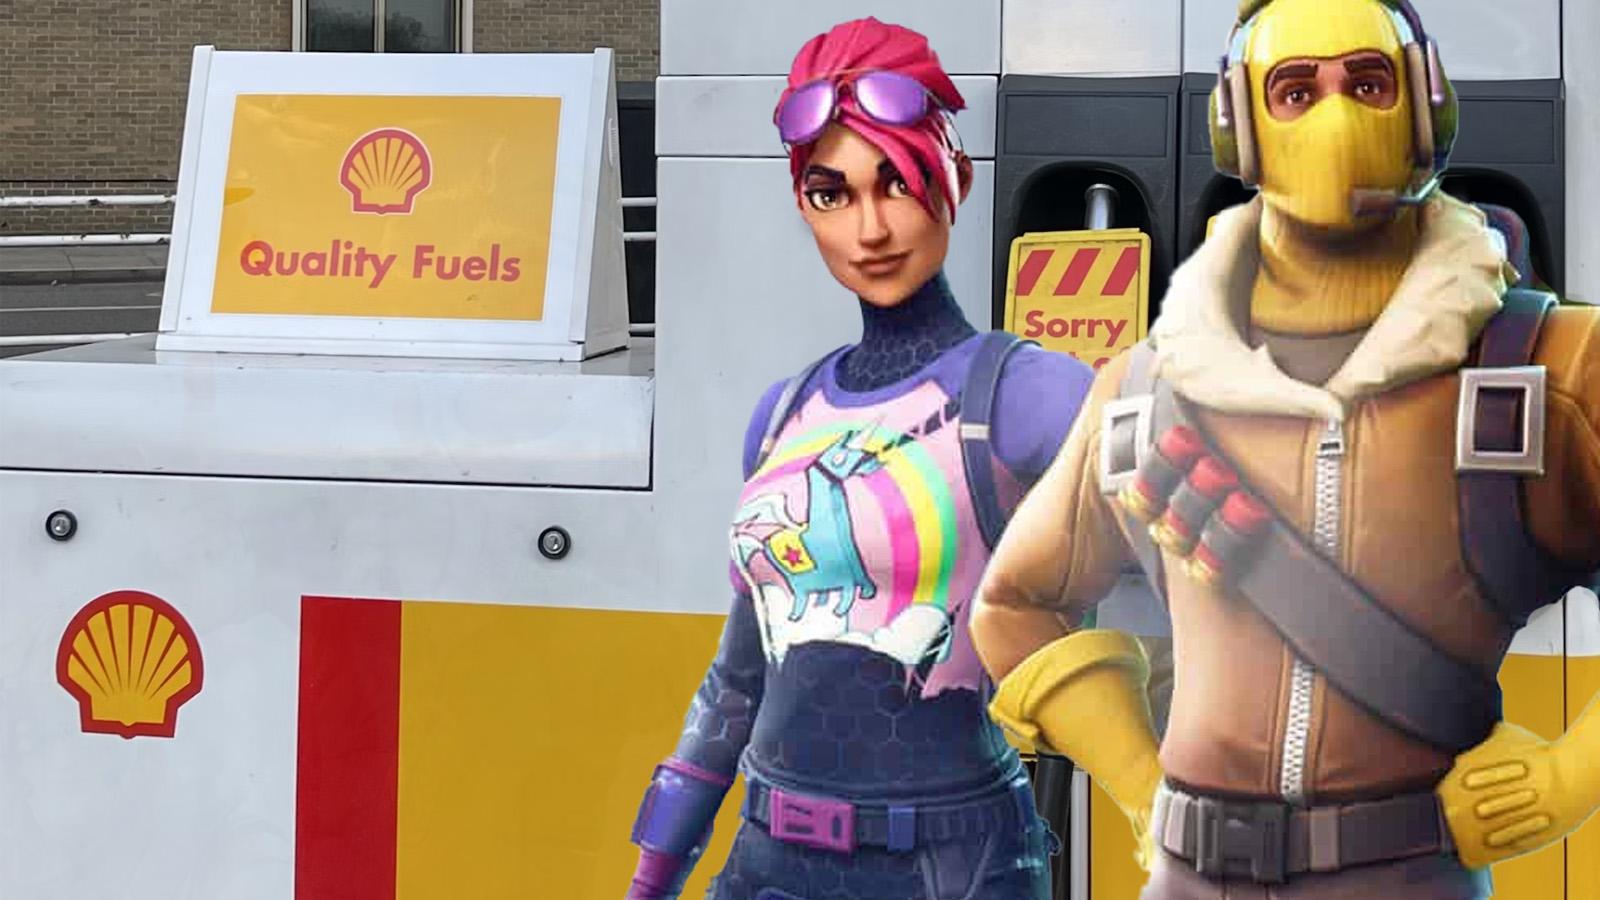 Shell sparks outrage after promoting fossil fuels with Fortnite campaign